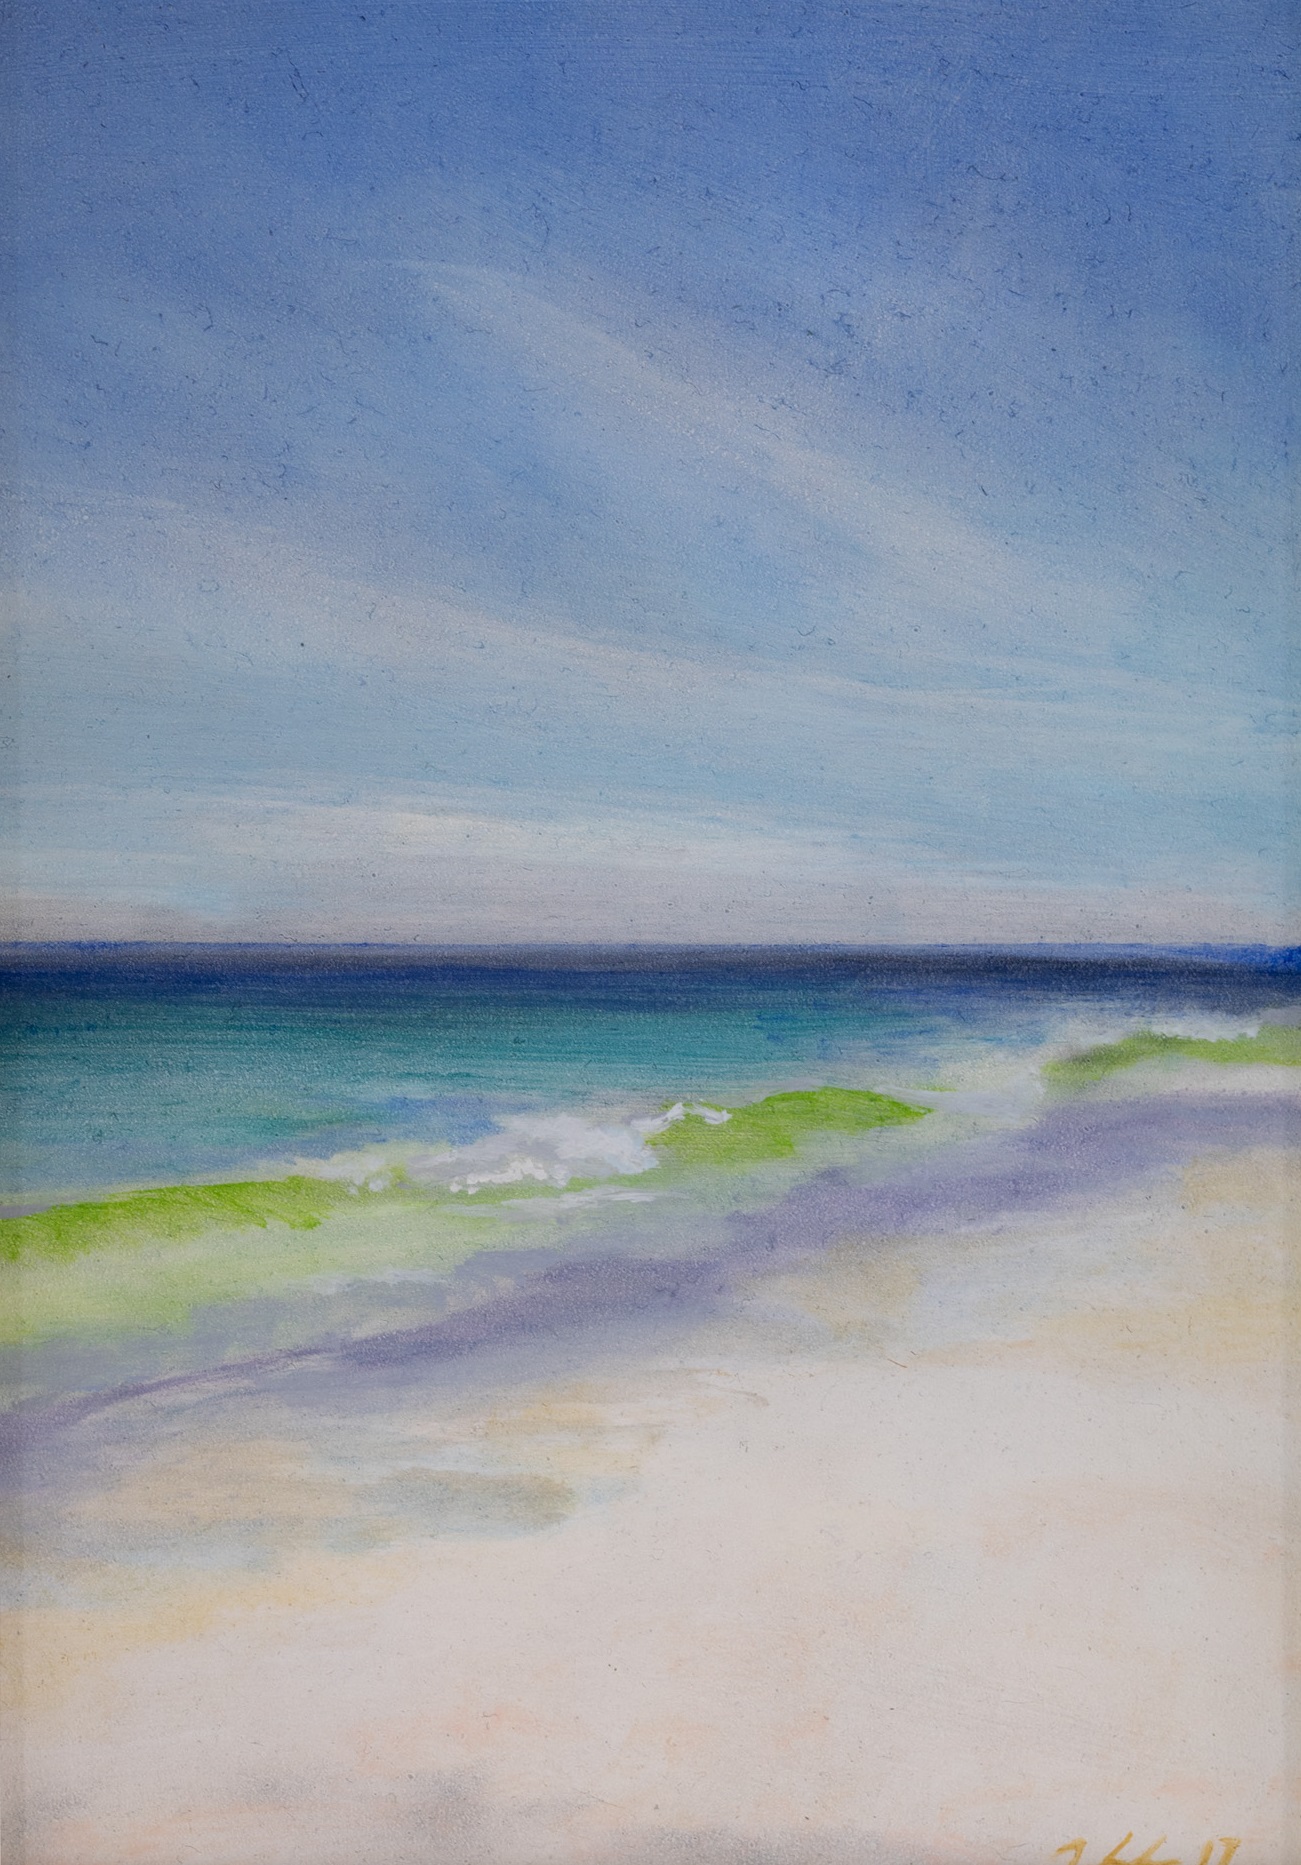 Beach Day, oil on panel, 5 x 7 in., $215.00